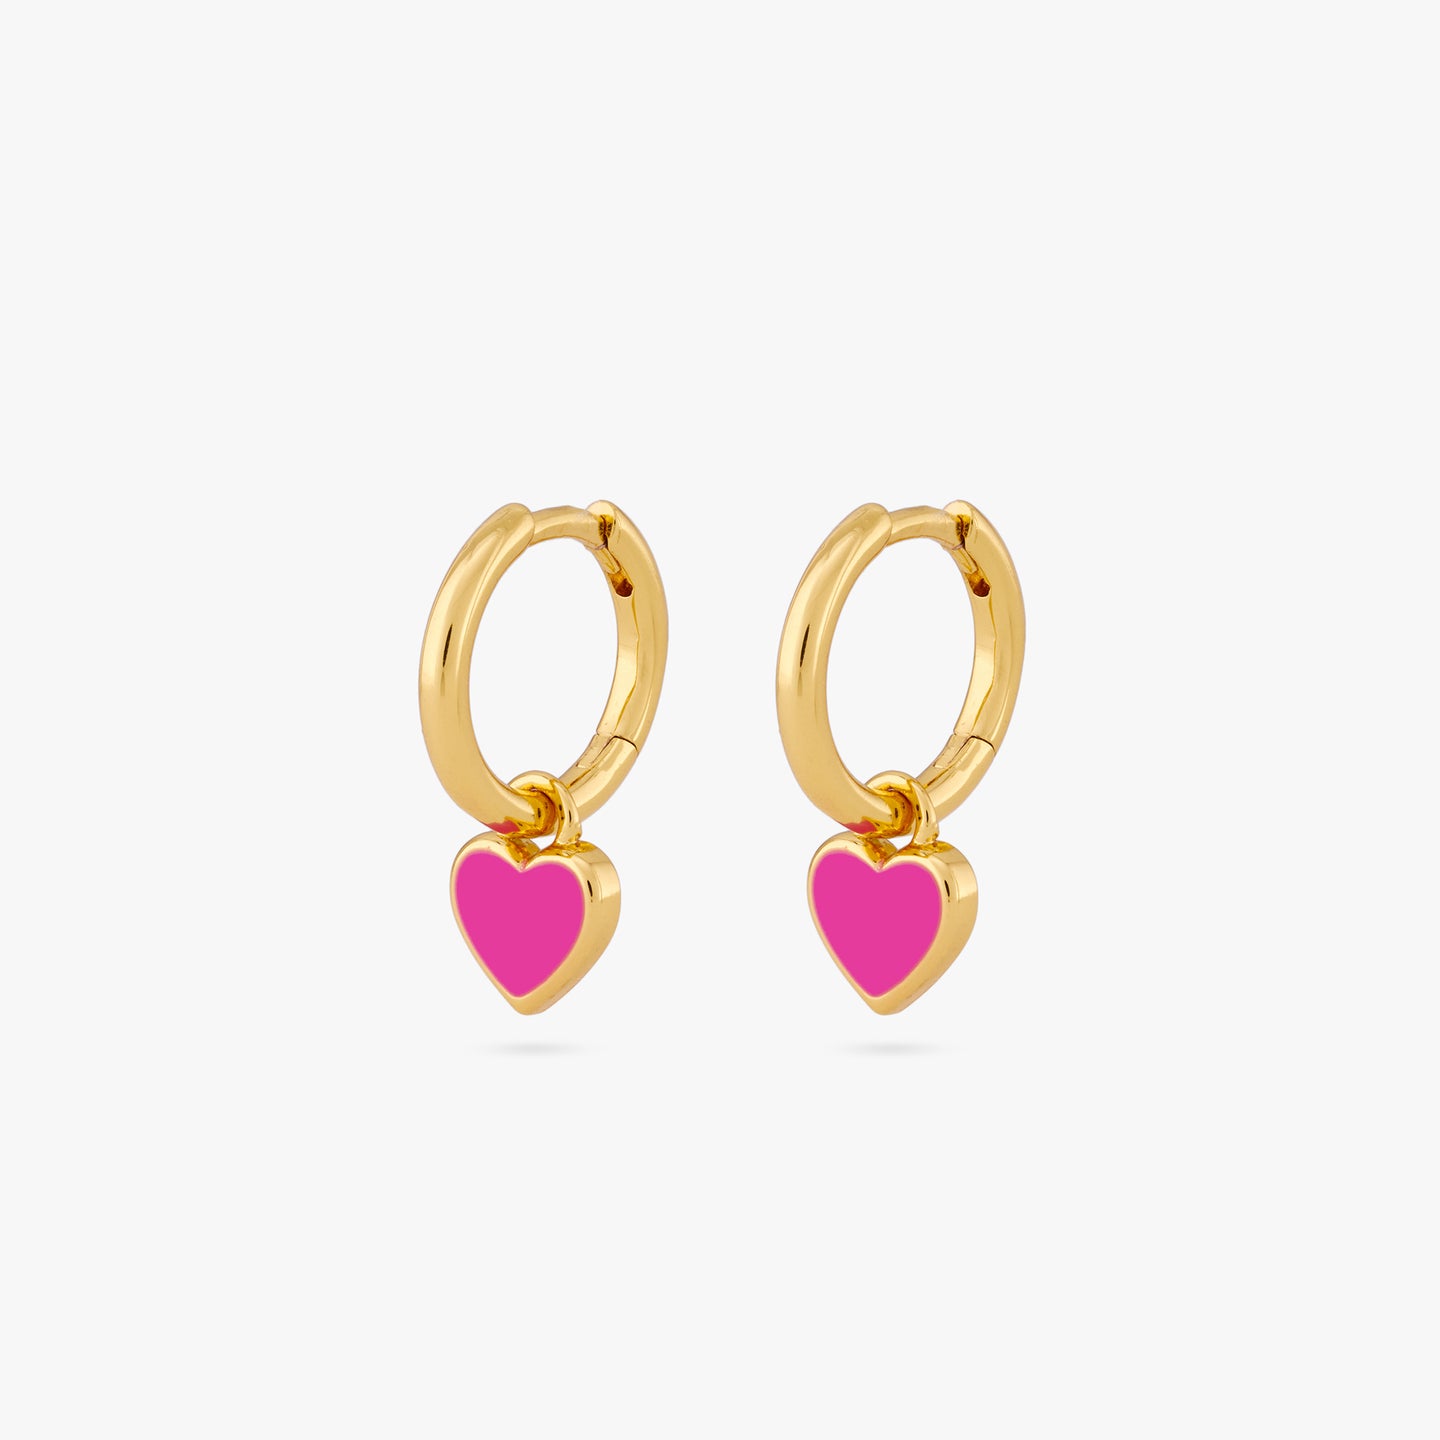 A pair of gold huggies with a pink enamel heart shaped charm [pair] color:null|gold